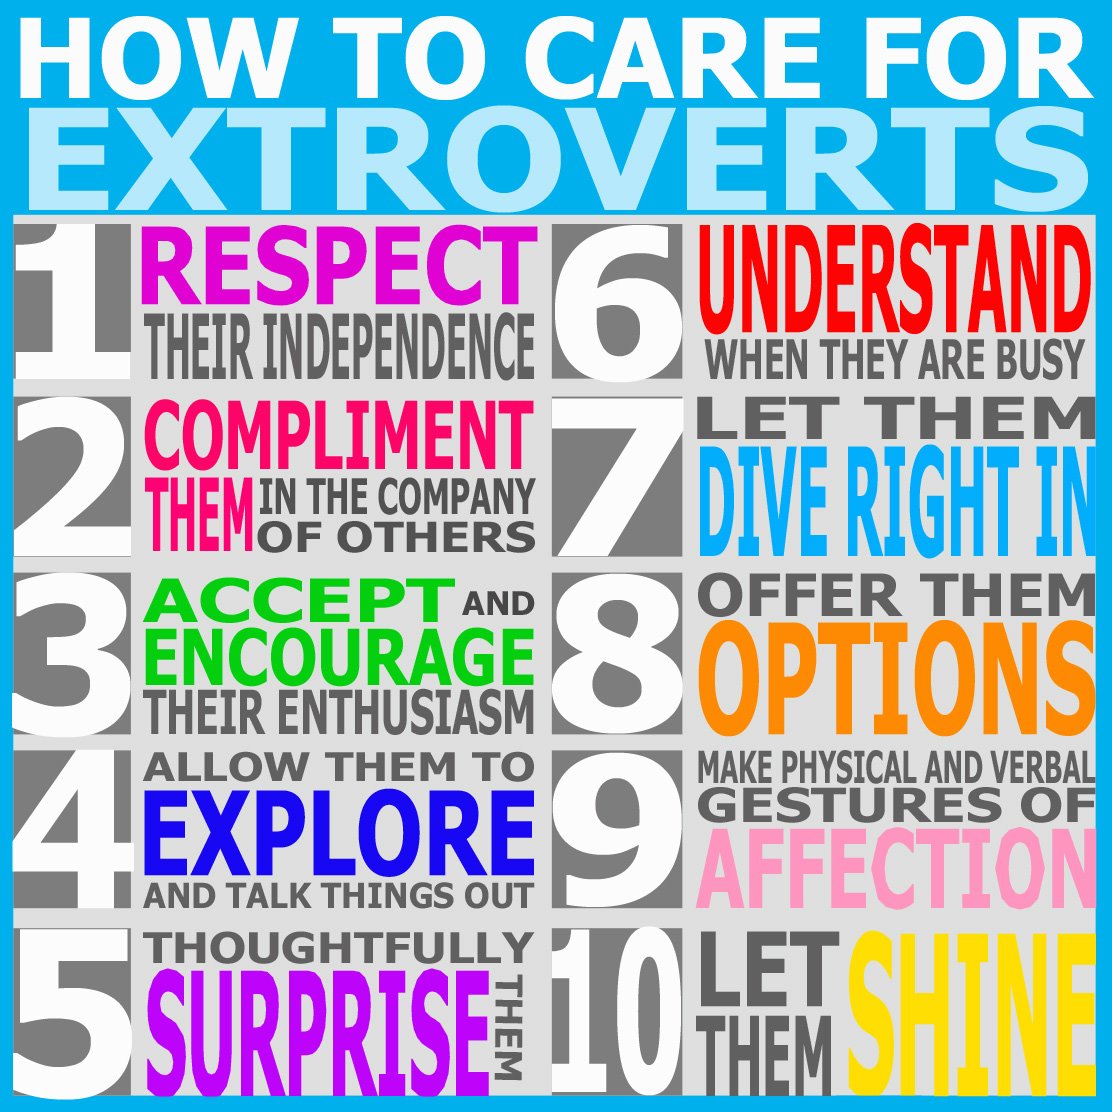 How to Care for Extroverts